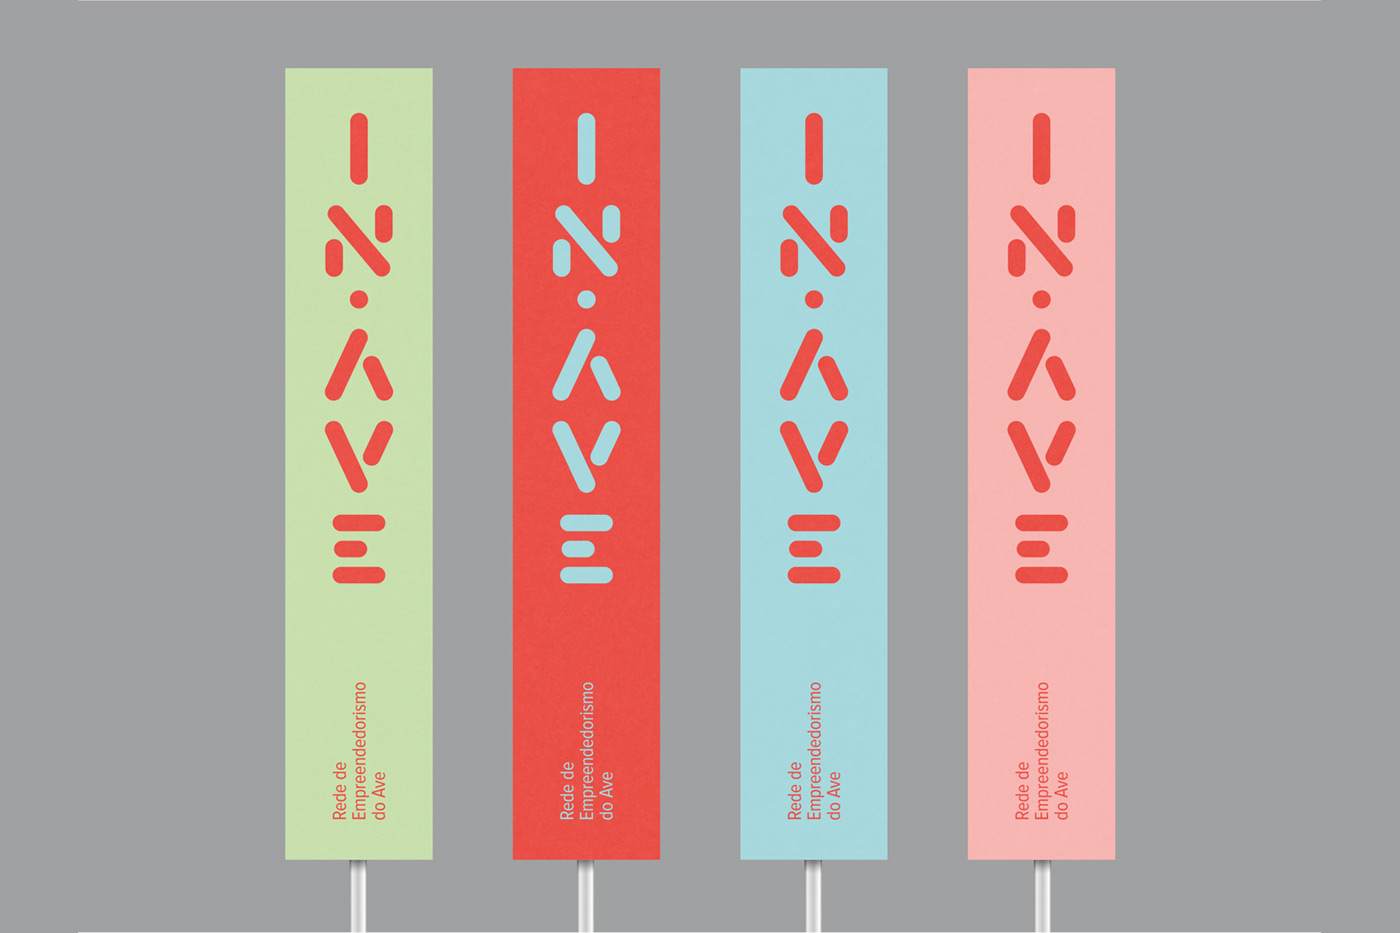 Inave network innovation ave logo Competition naming